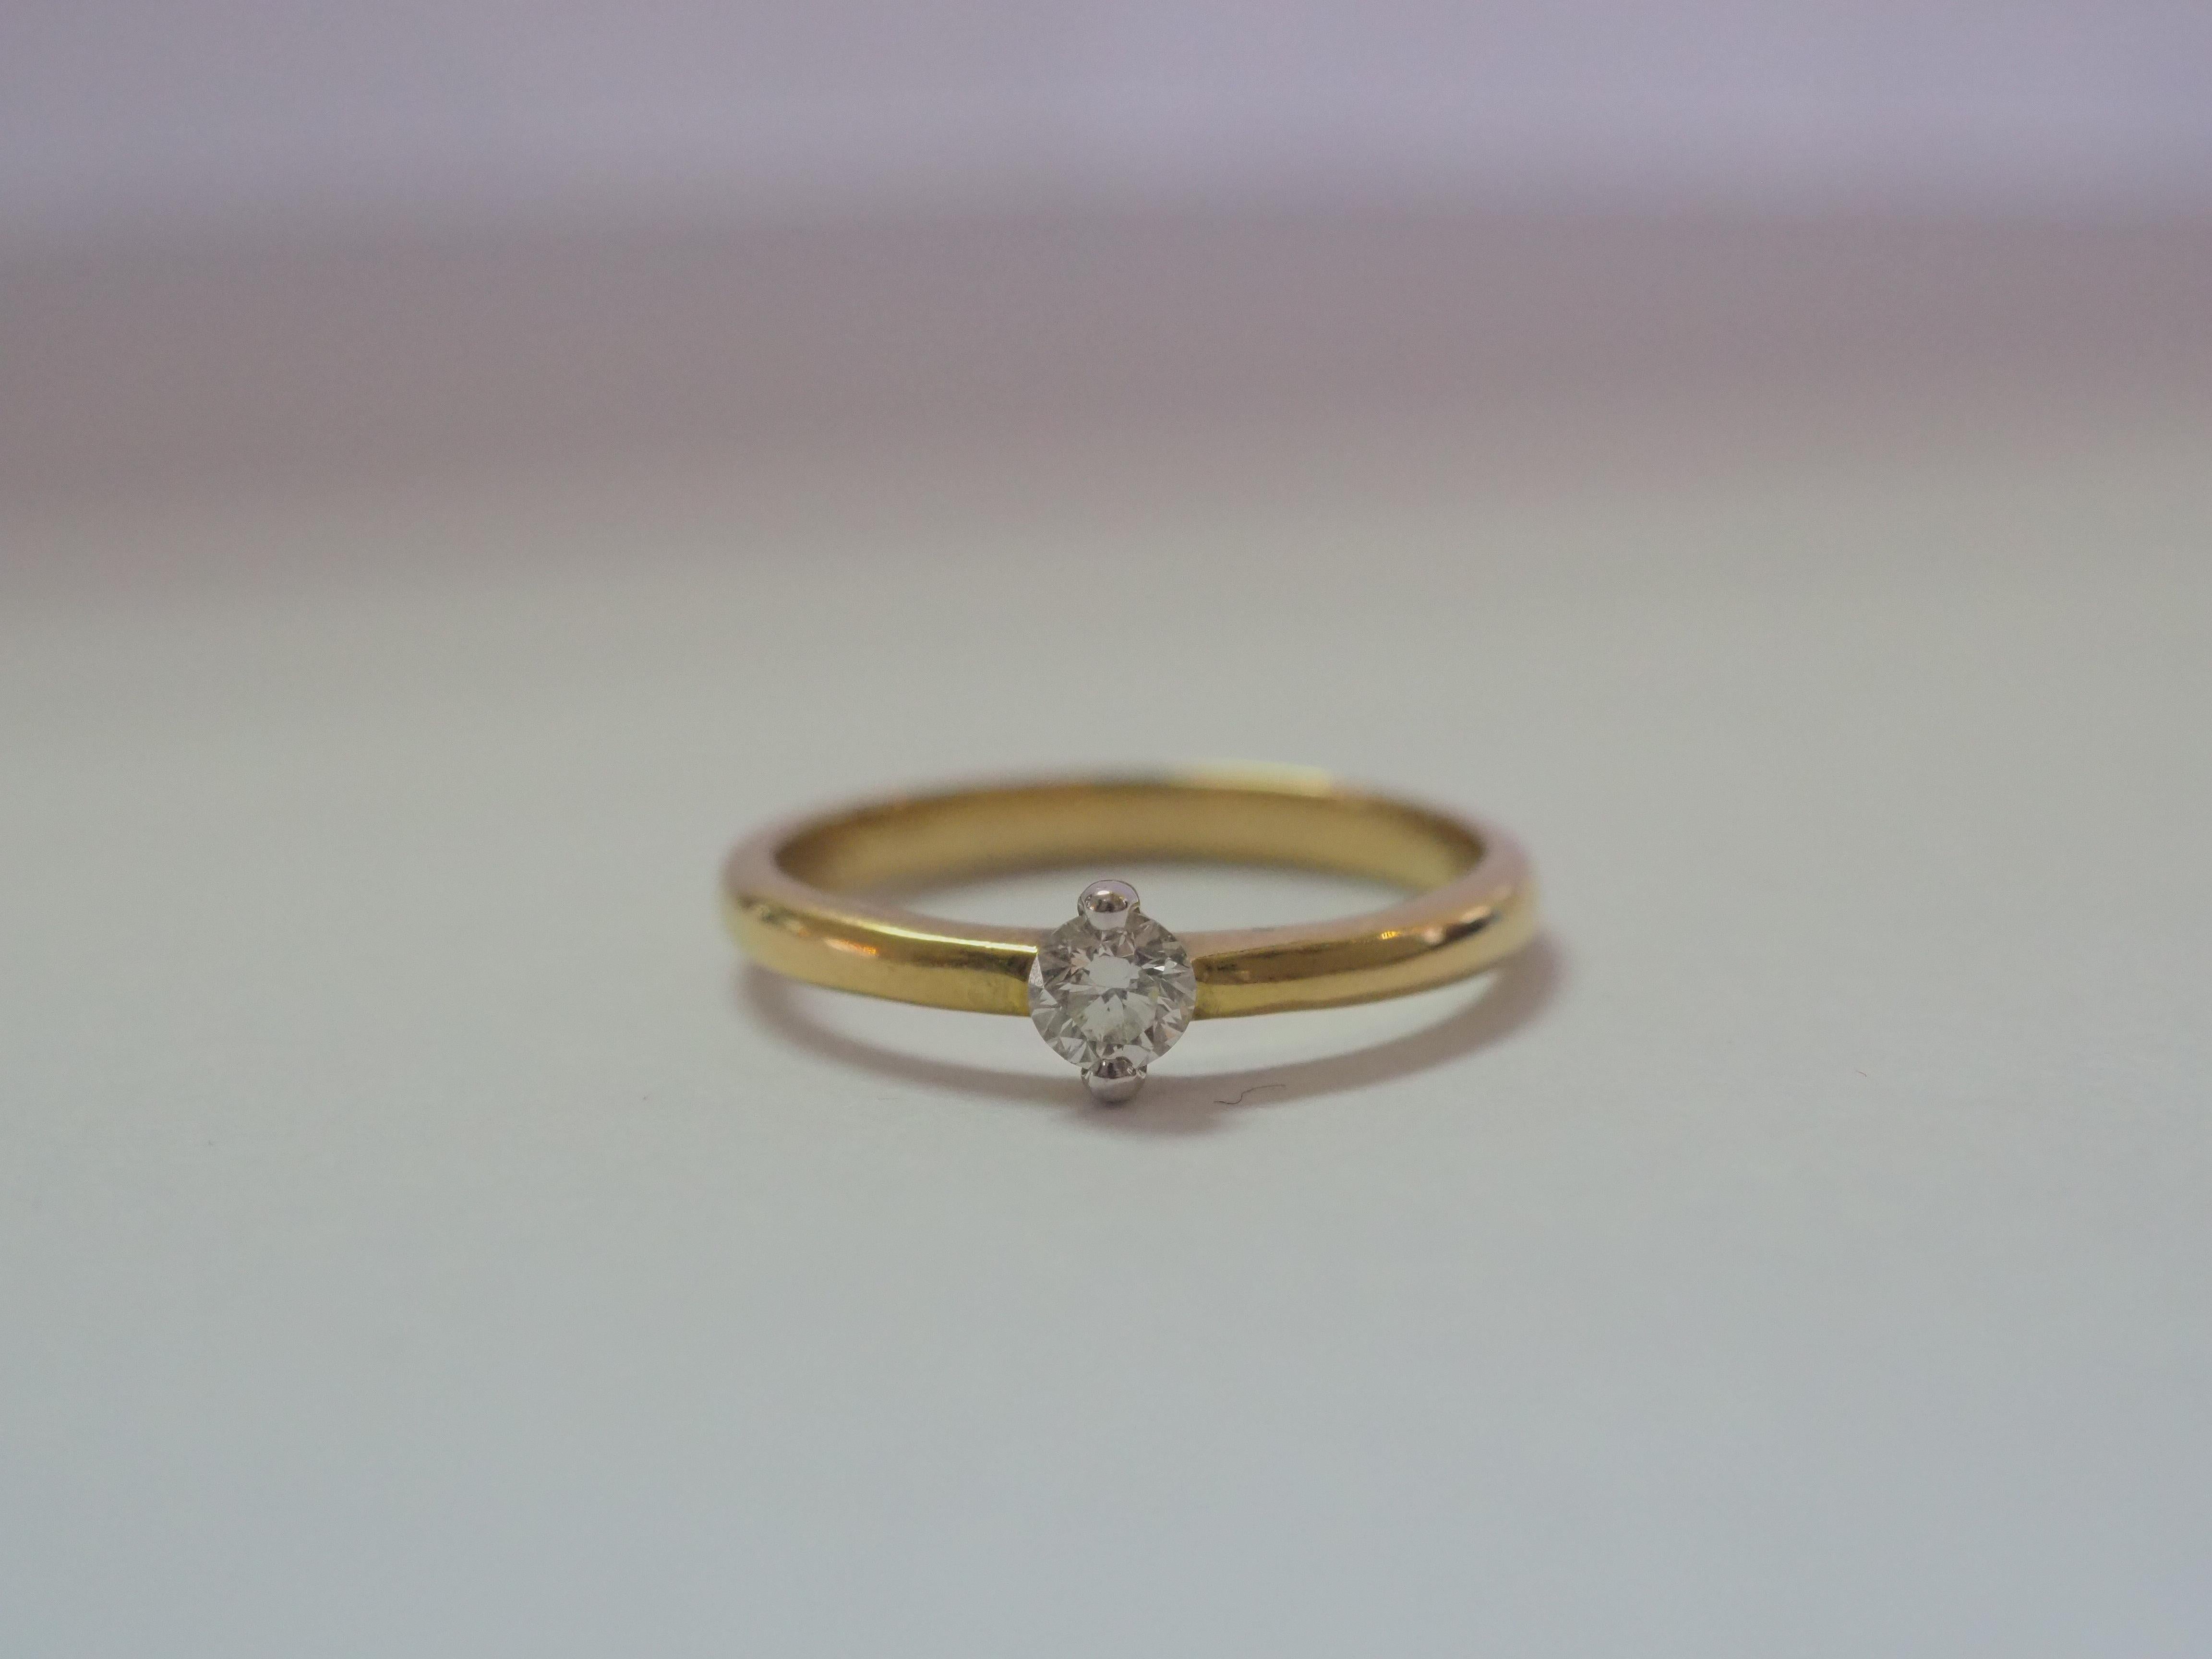 This beautiful solitaire engagement ring boasts a very stunning 0.20 carats VS1-VS2 D color diamond as the main stone! The ring looks dainty but the shank is actually solid. The quality mounting with timeless solitaire design. This ring is perfect